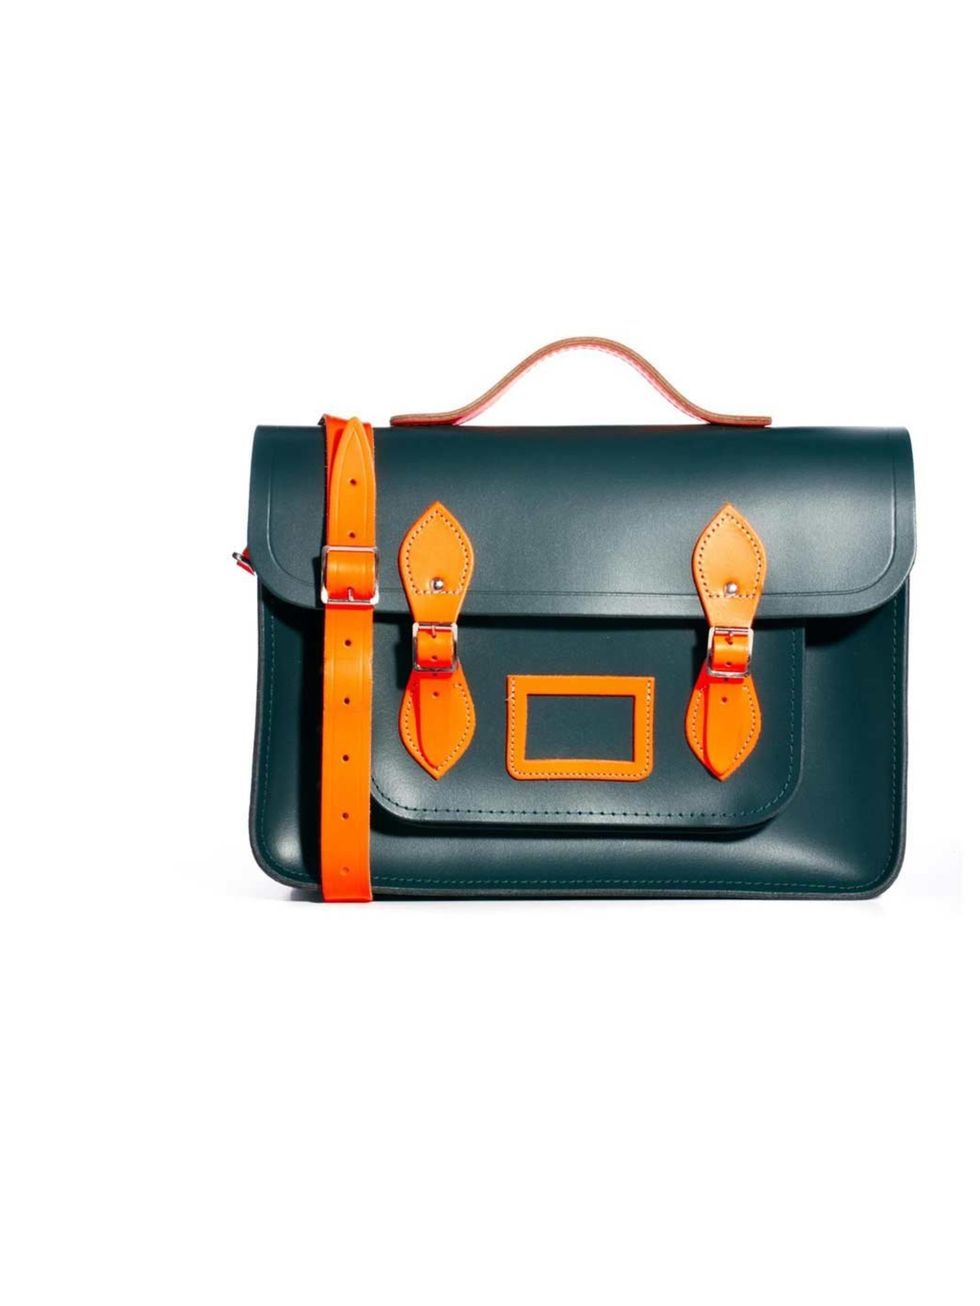 <p>Cambridge Satchel Company leather satchel, £145, available from <a href="http://www.asos.com/Cambridge-Satchel-Company/The-Cambridge-Satchel-Company-15-Leather-Satchel/Prod/pgeproduct.aspx?iid=3162832&amp;SearchQuery=cambridge%20satchel%20company&amp;s